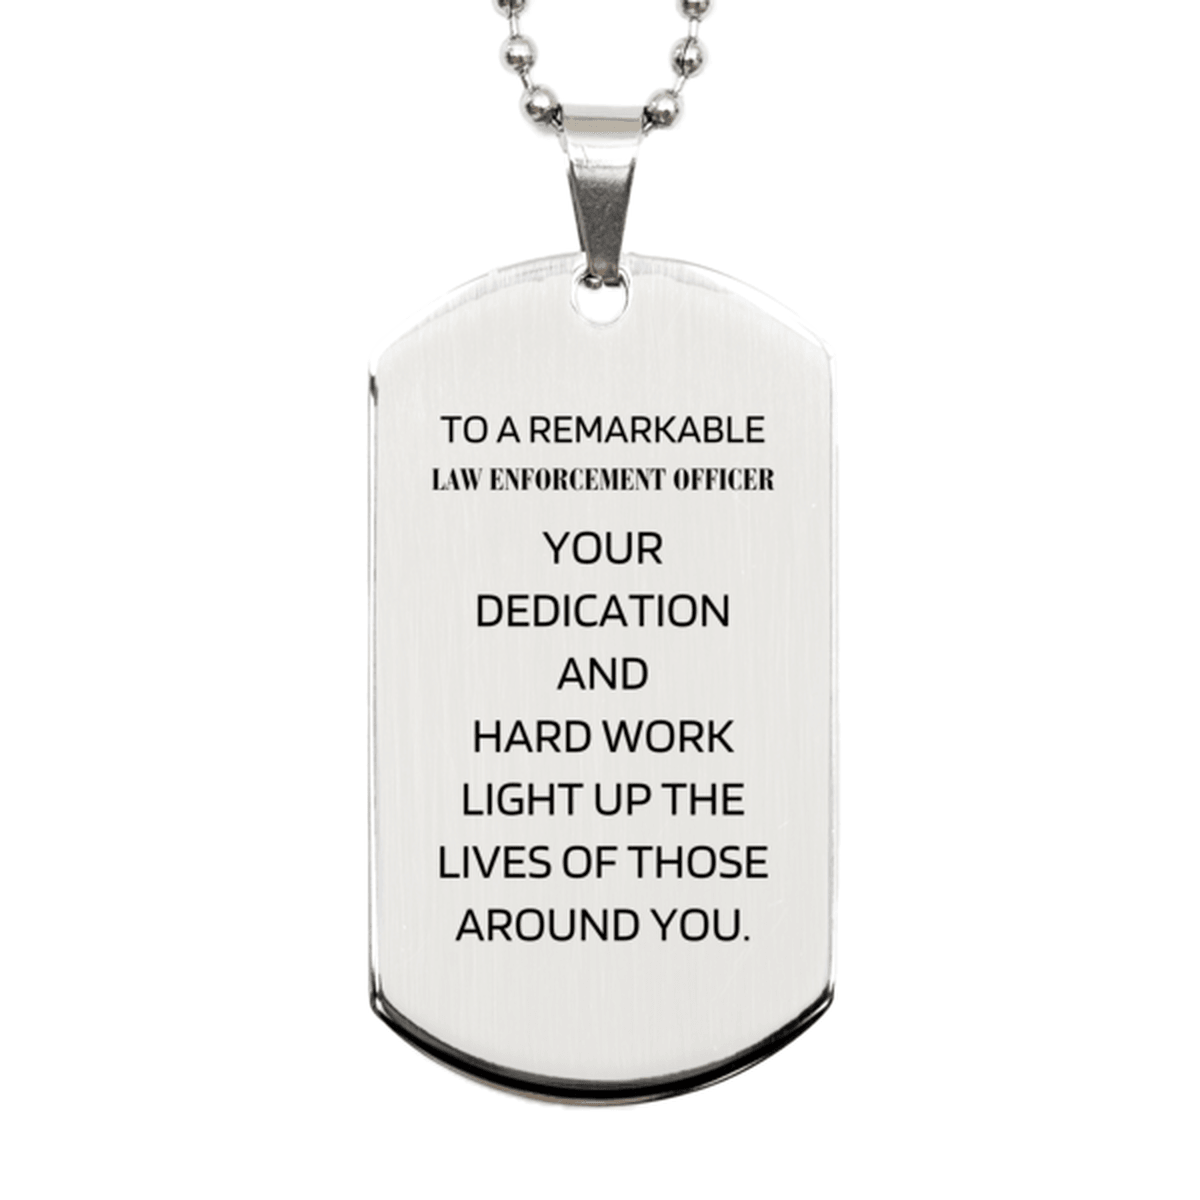 Remarkable Law Enforcement Officer Gifts, Your dedication and hard work, Inspirational Birthday Christmas Unique Silver Dog Tag For Law Enforcement Officer, Coworkers, Men, Women, Friends - Mallard Moon Gift Shop